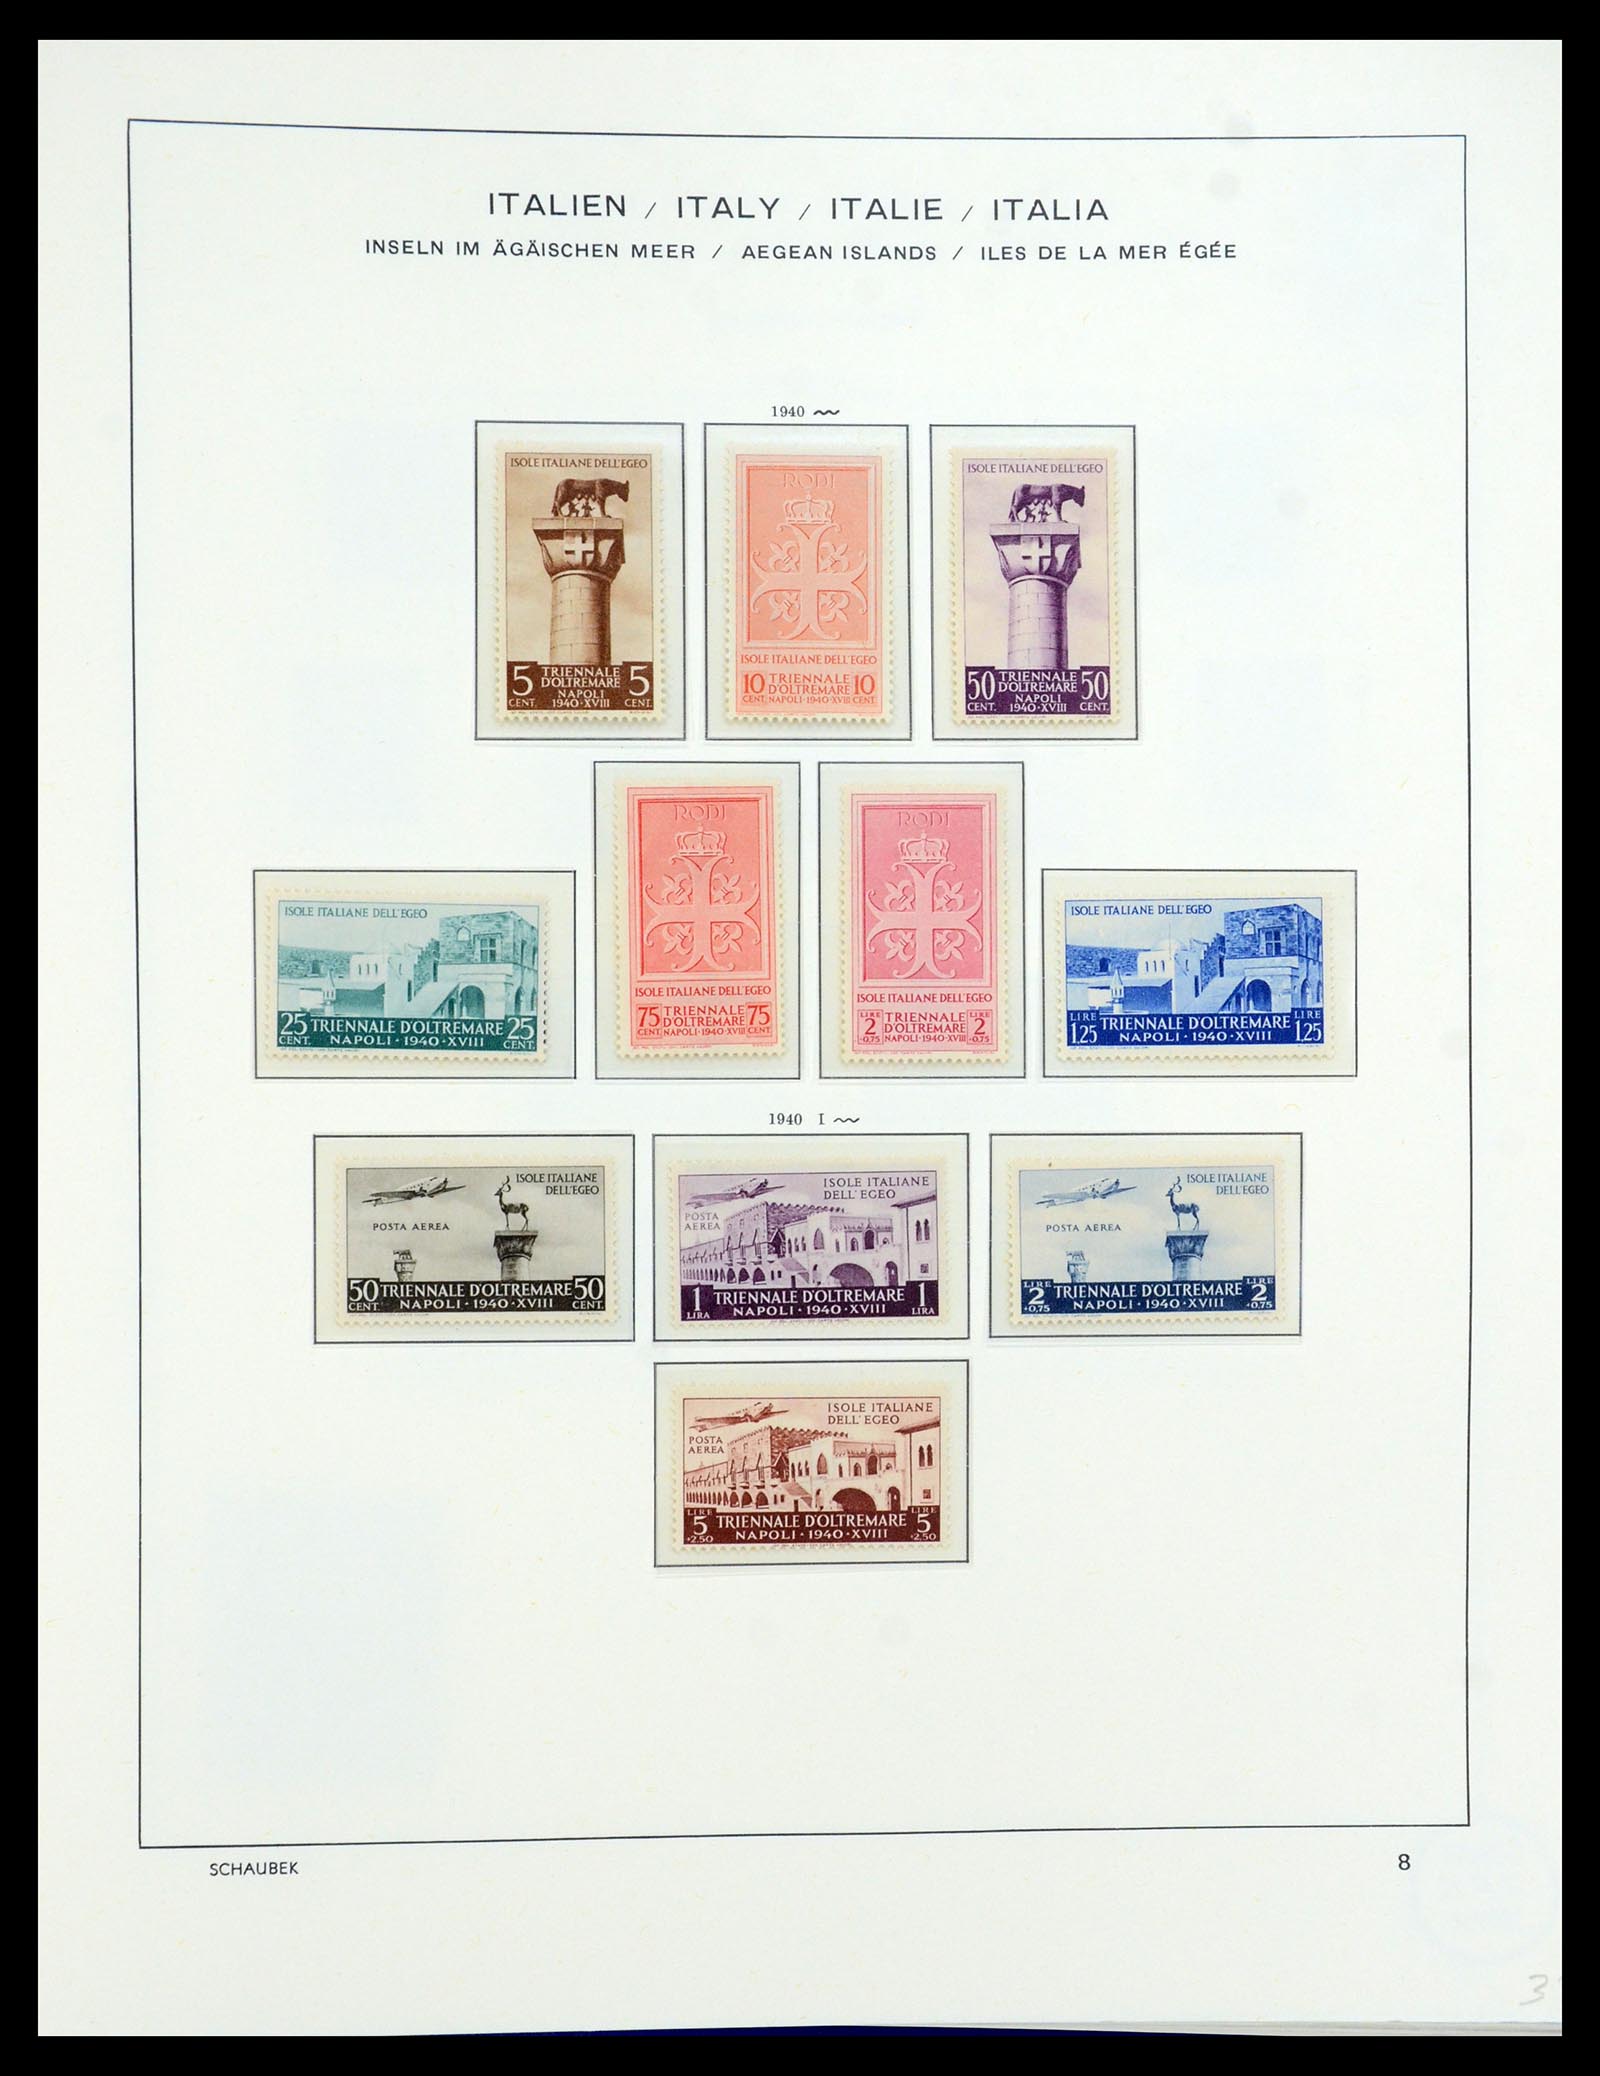 36181 010 - Stamp collection 36181 Italian Aegean Islands 1912-1941.